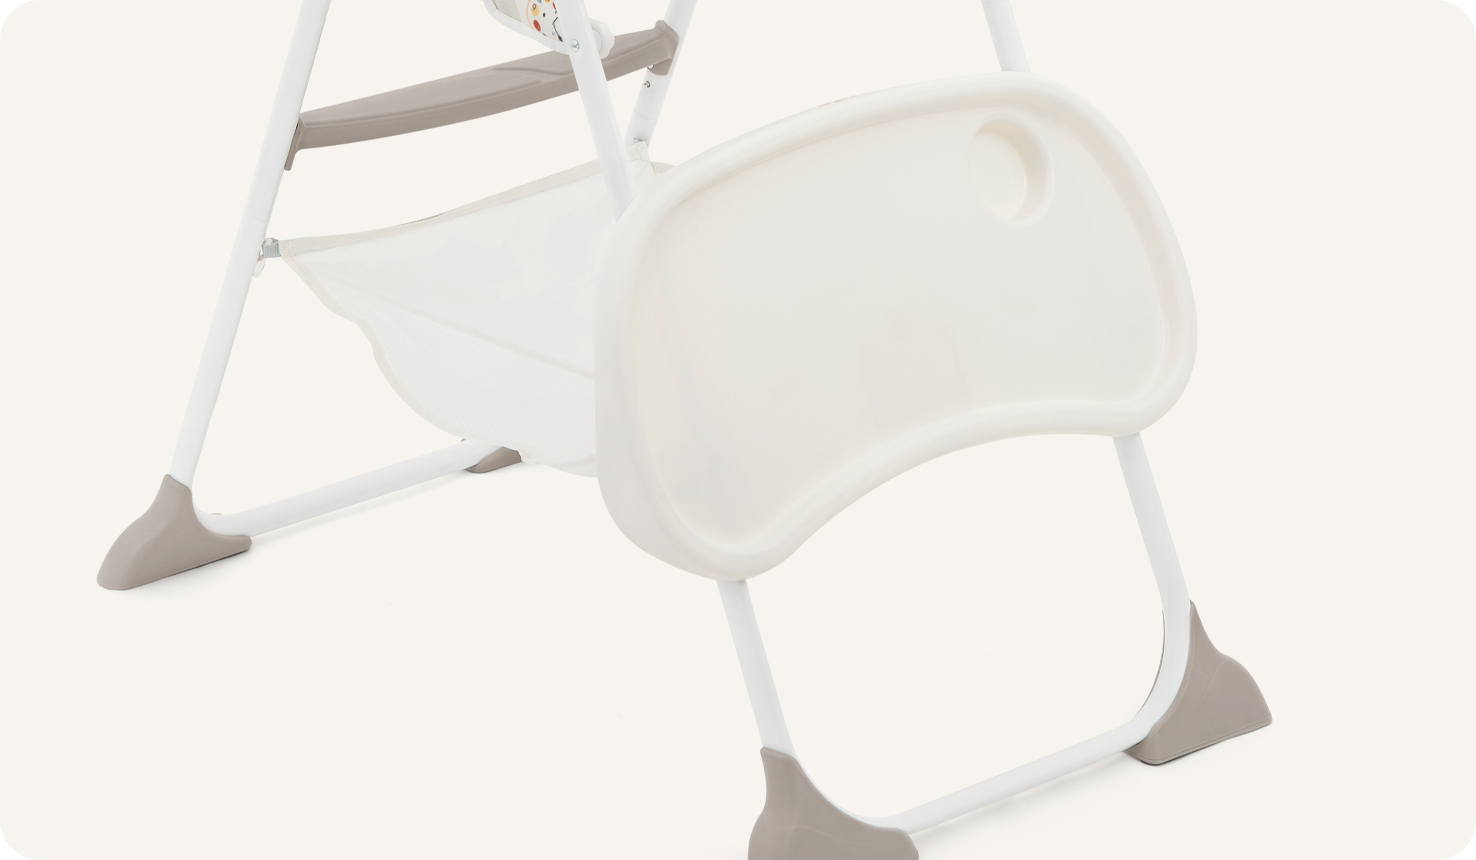  The Joie highchair mimzy Snacker in a multi-color print featuring cartoon clock faces, animals, and geometric shapes showing how the tray stores on the back legs.